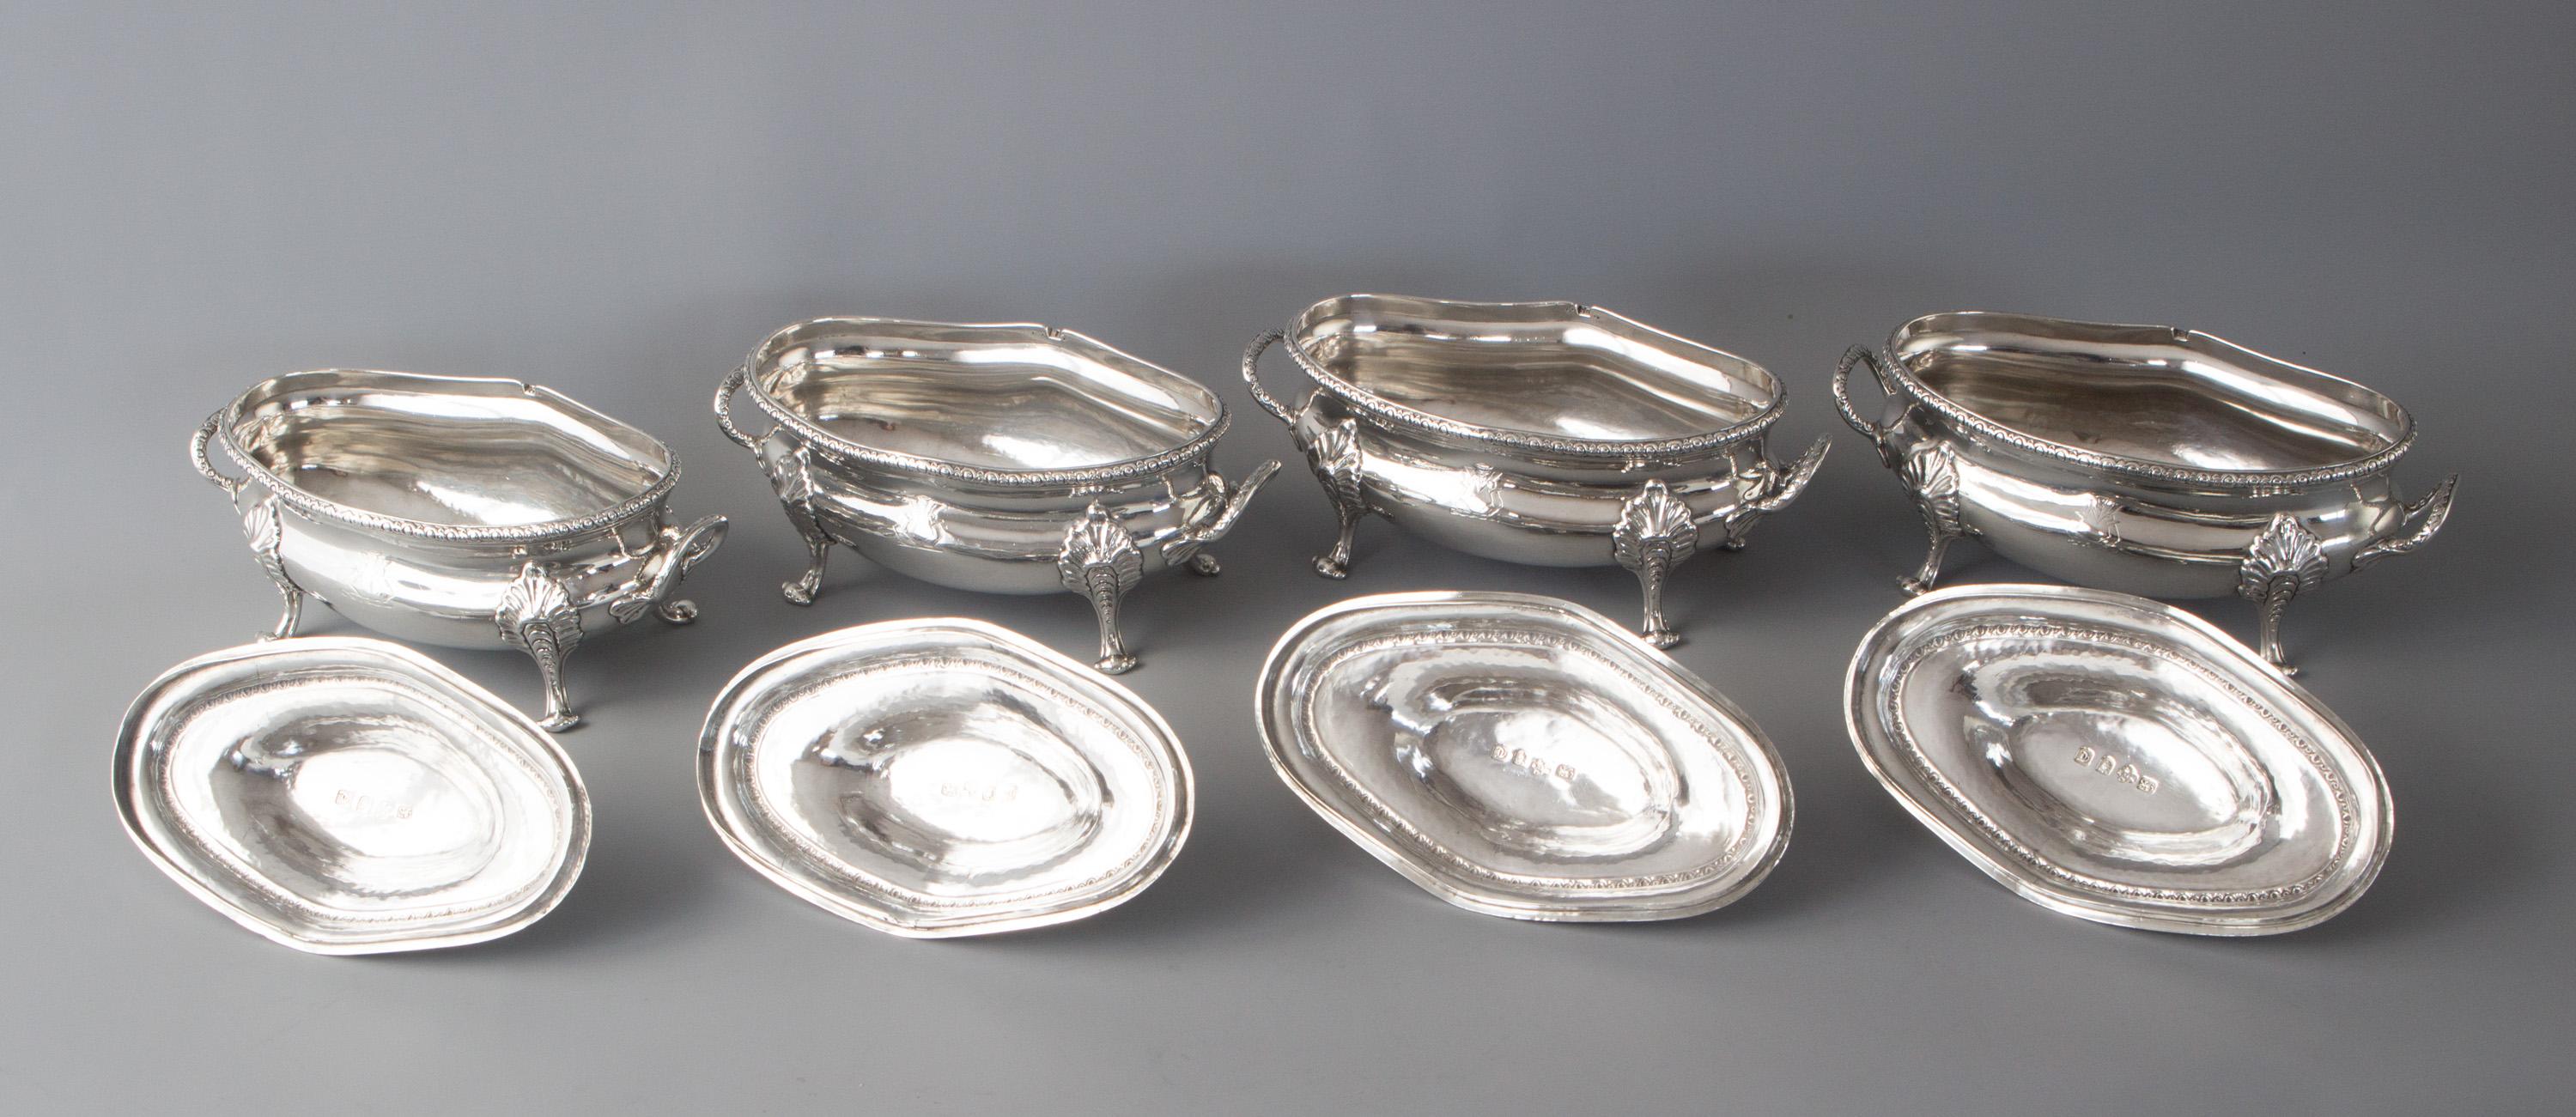 George III Silver Sauce Tureens from the Speaker Smith Service, London 1774 13